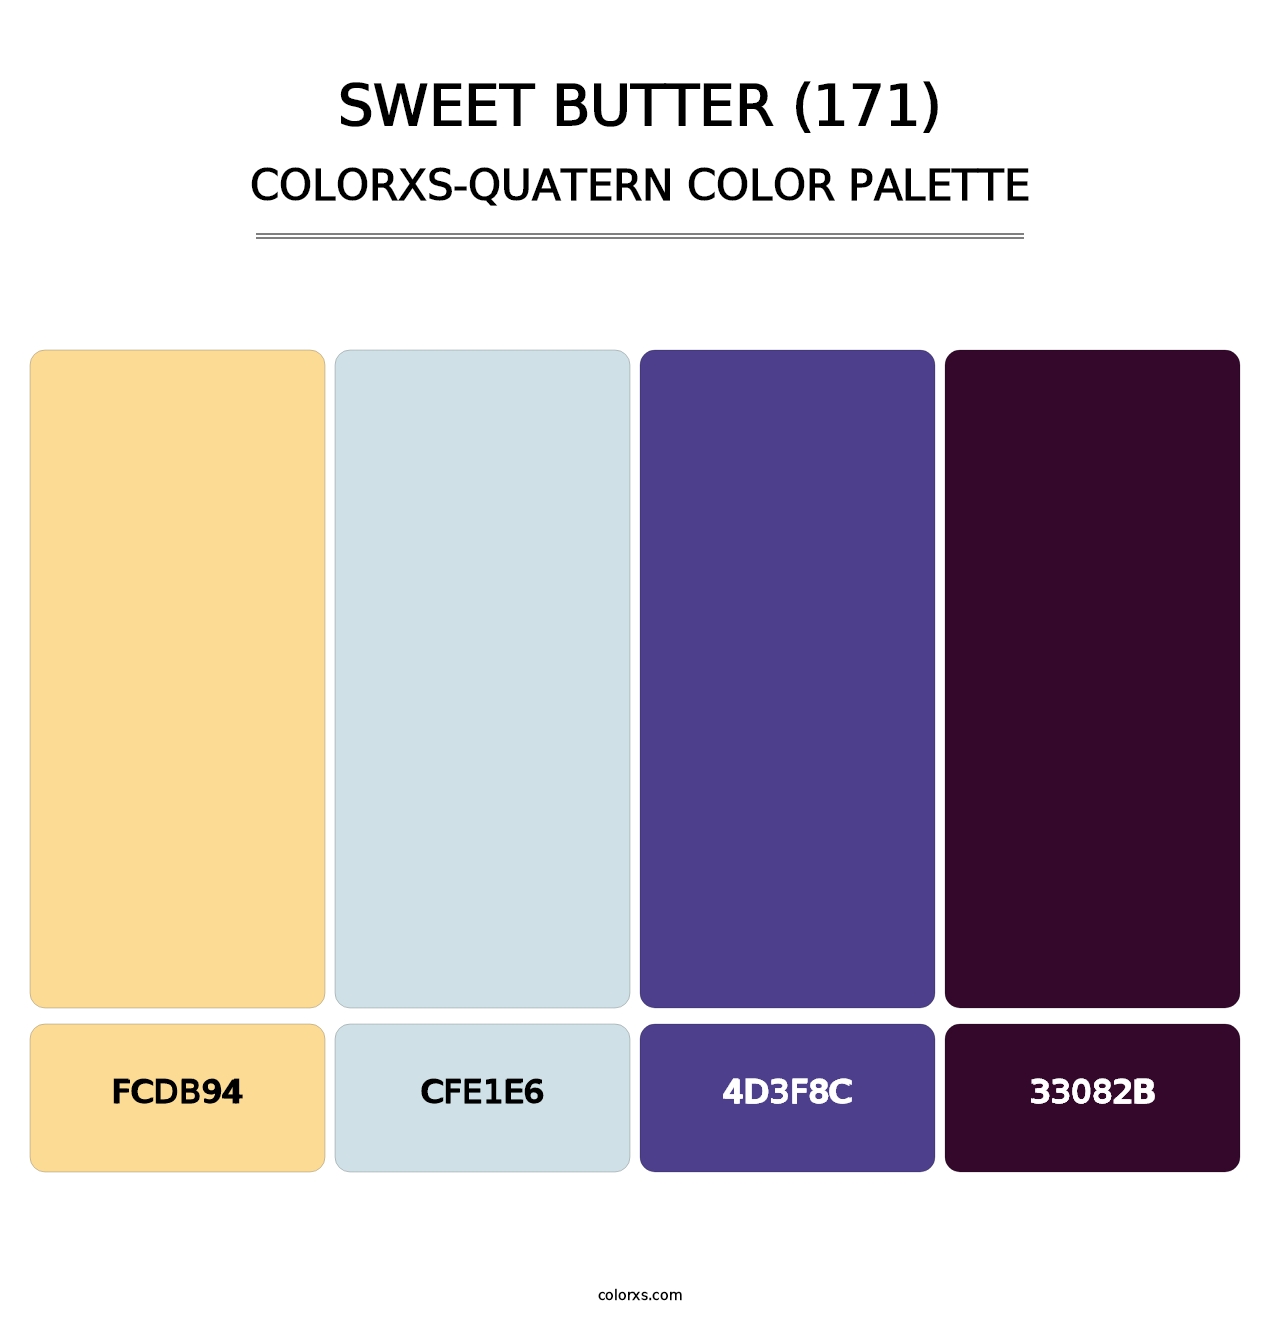 Sweet Butter (171) - Colorxs Quatern Palette